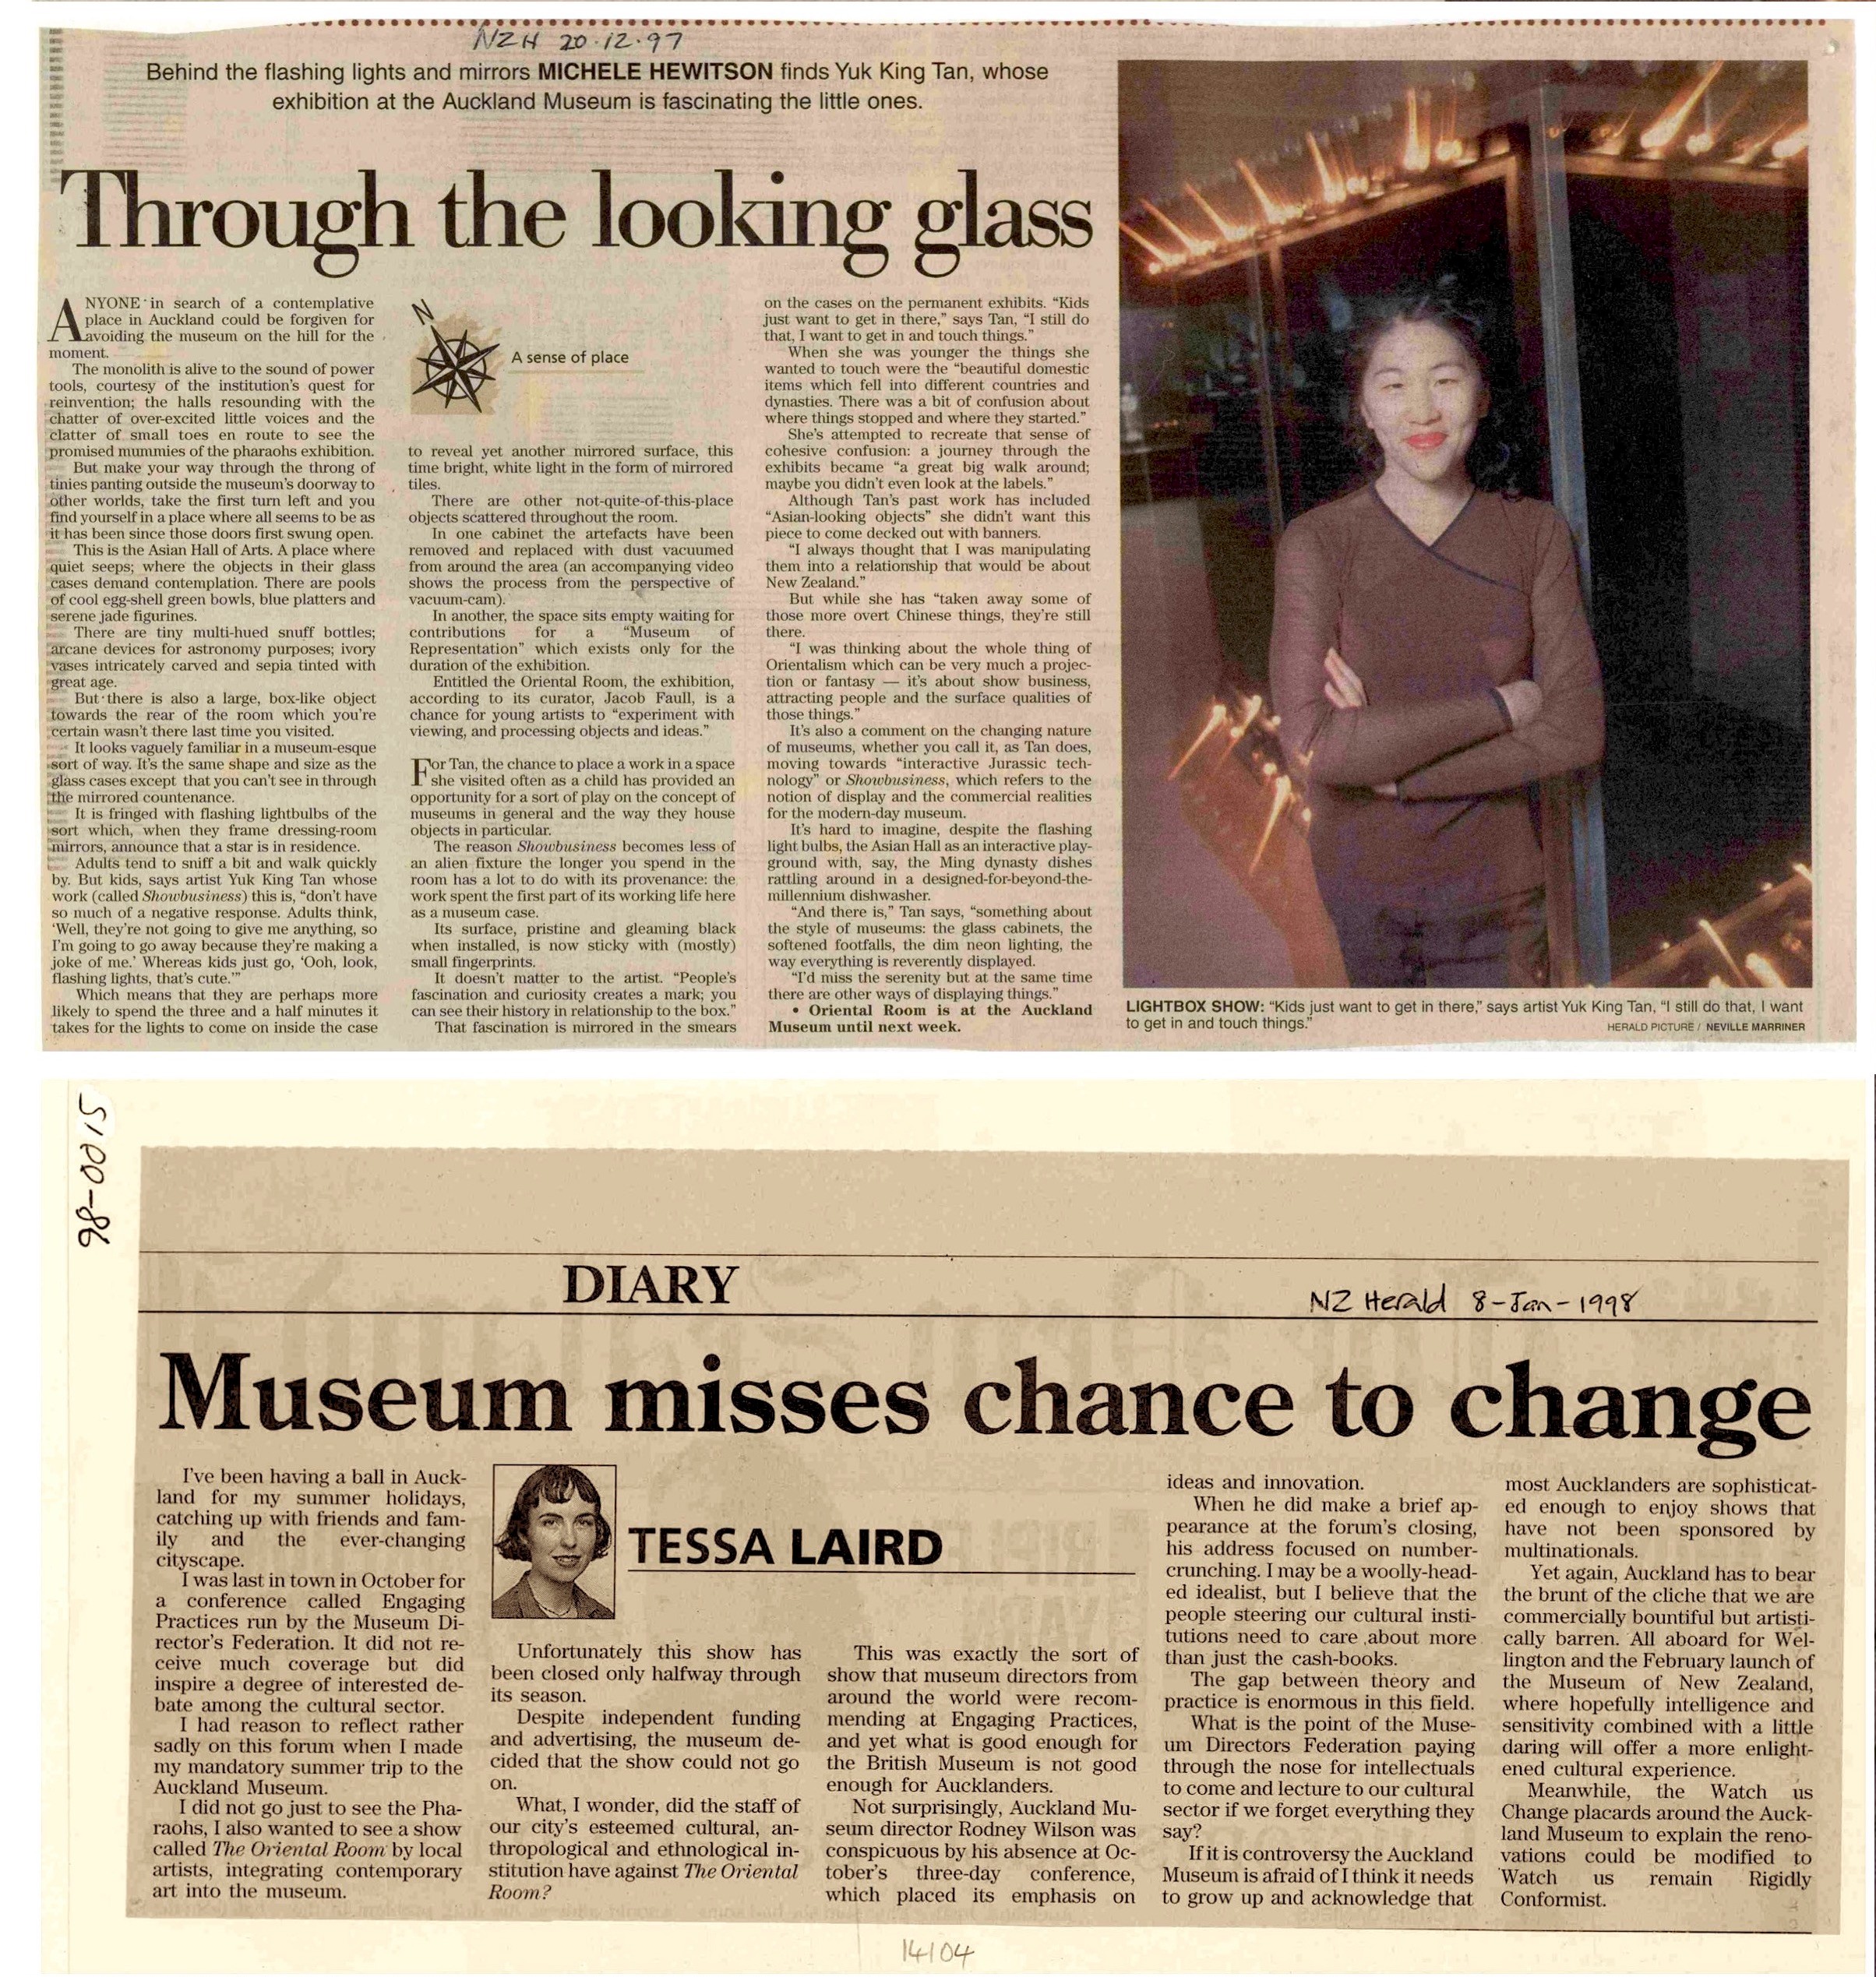 Two newspaper clippings. One showing Yuk King Tan in front of a lit-up exhibit, and another with the headline 'Museum misses chance to change'.